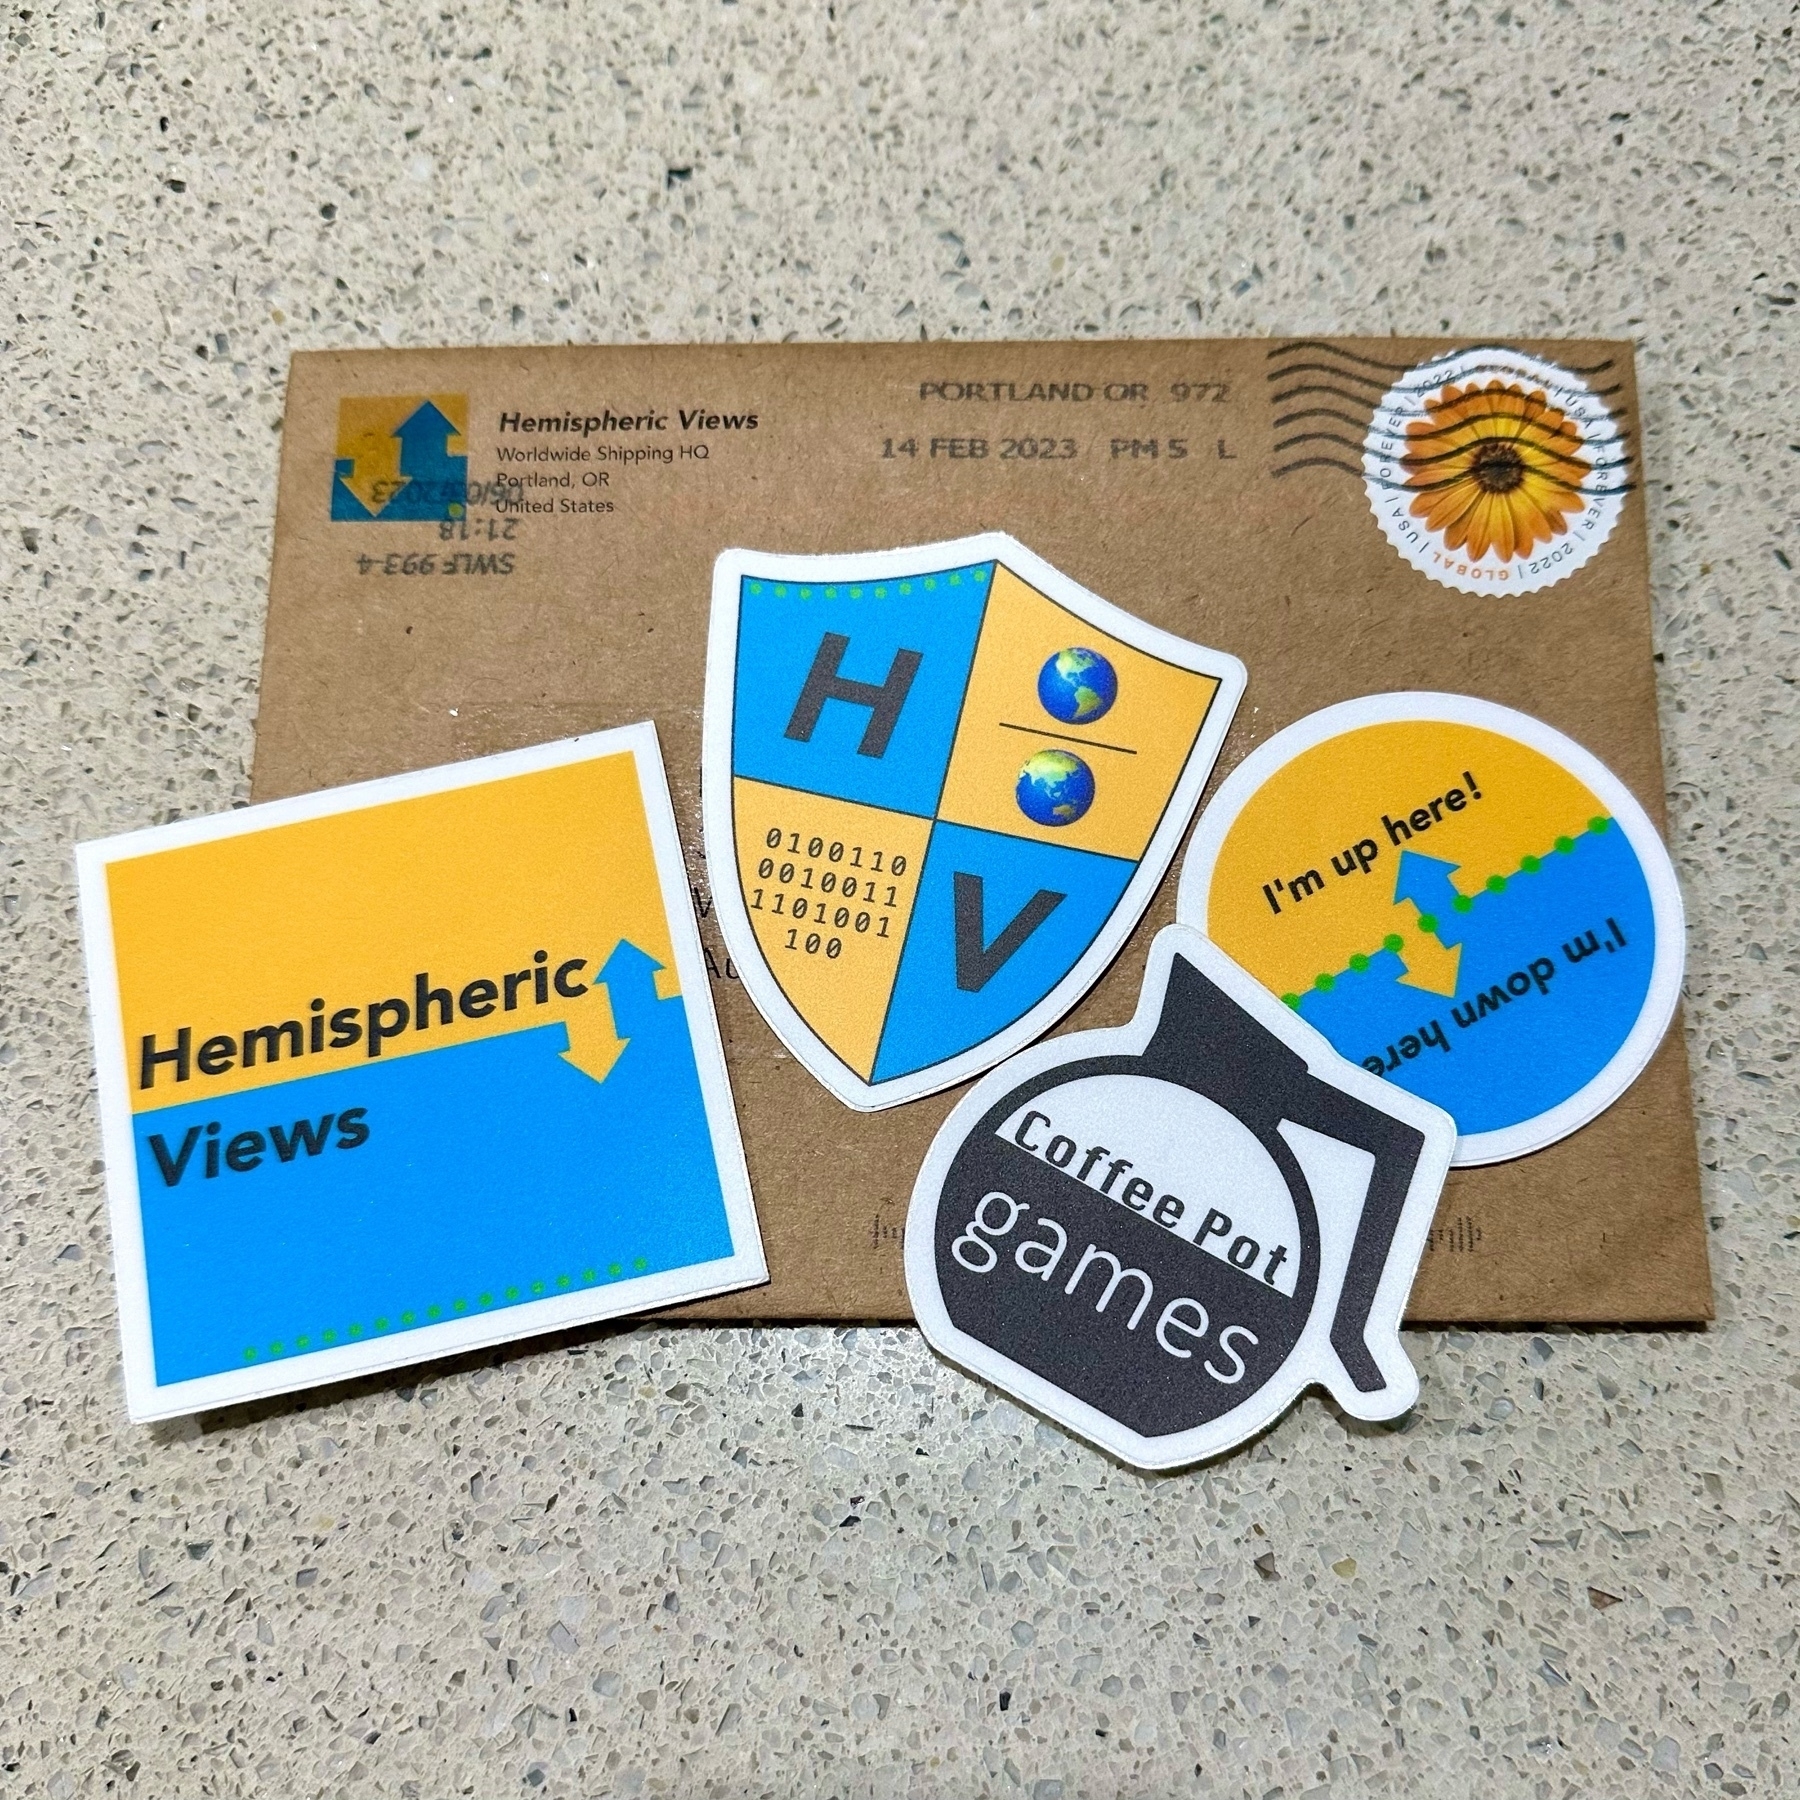 A brown envelope postmarked Portland Oregon on a stone bench top. On top of the envelope are three yellow and blue stickers of different shapes with “Hemispheric Views” on them plus one black and white sticker in the shape of a coffee pot which has “coffee pot games” inside the pot.